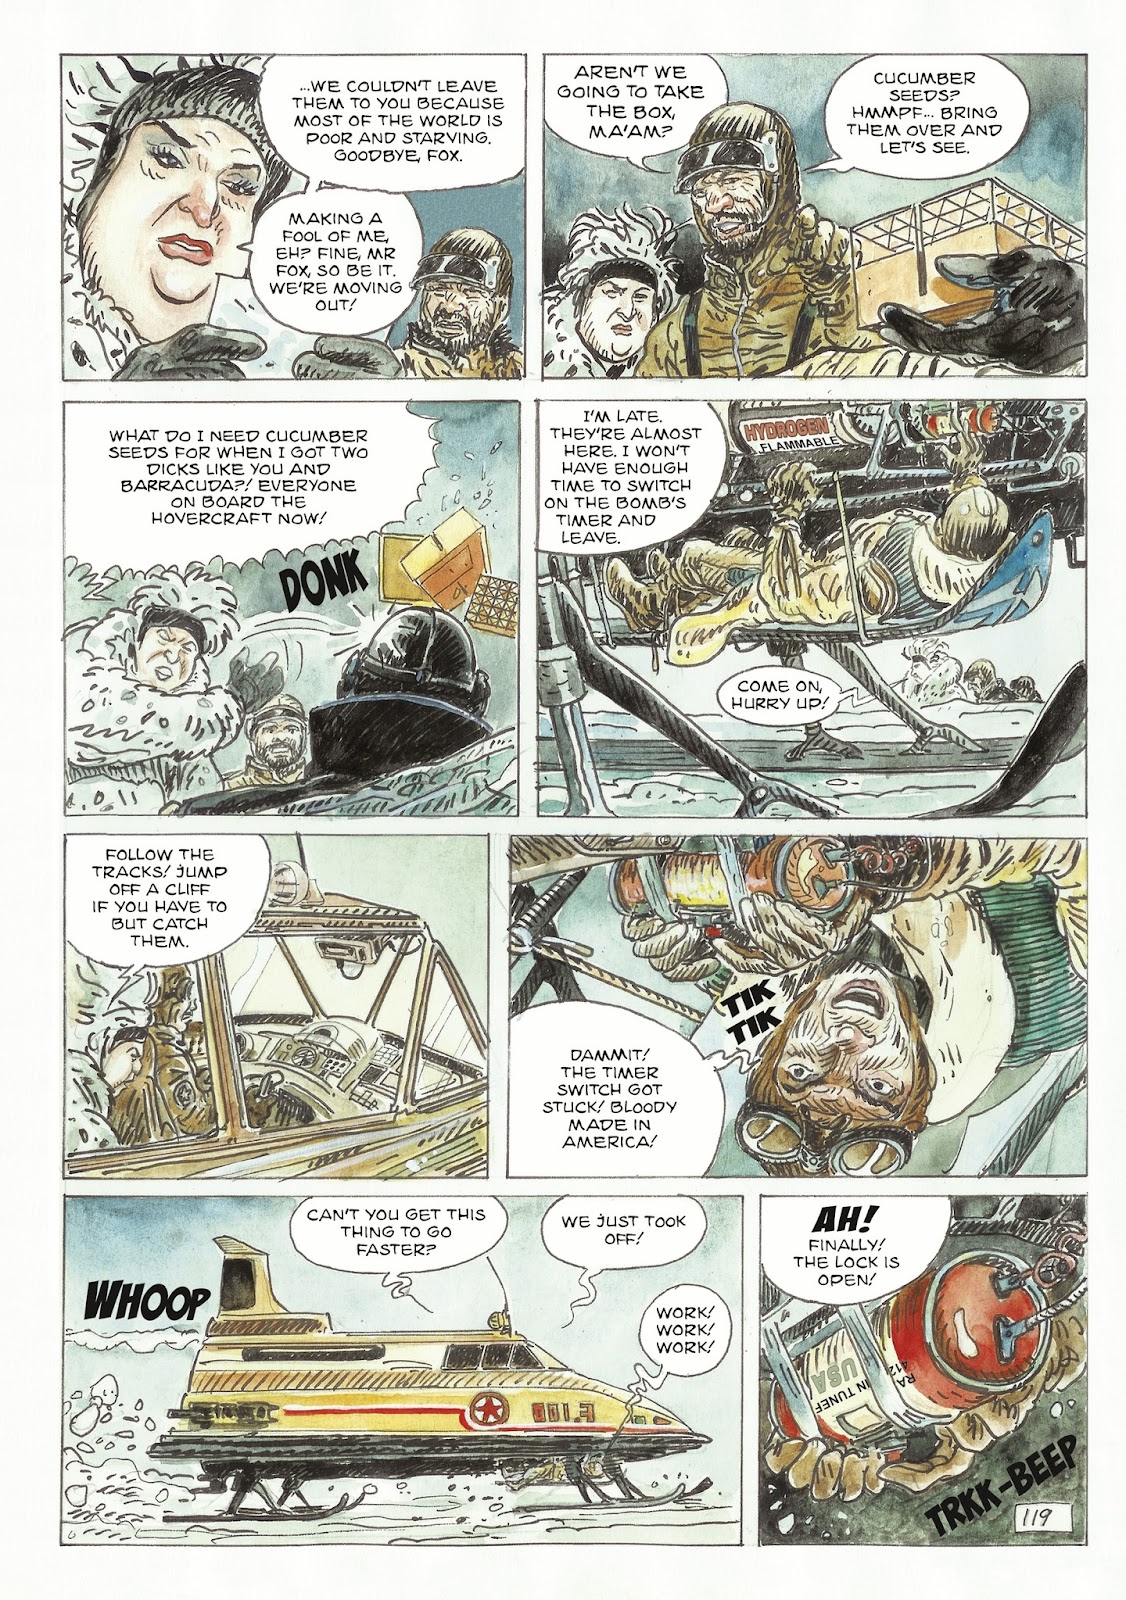 The Man With the Bear issue 2 - Page 65